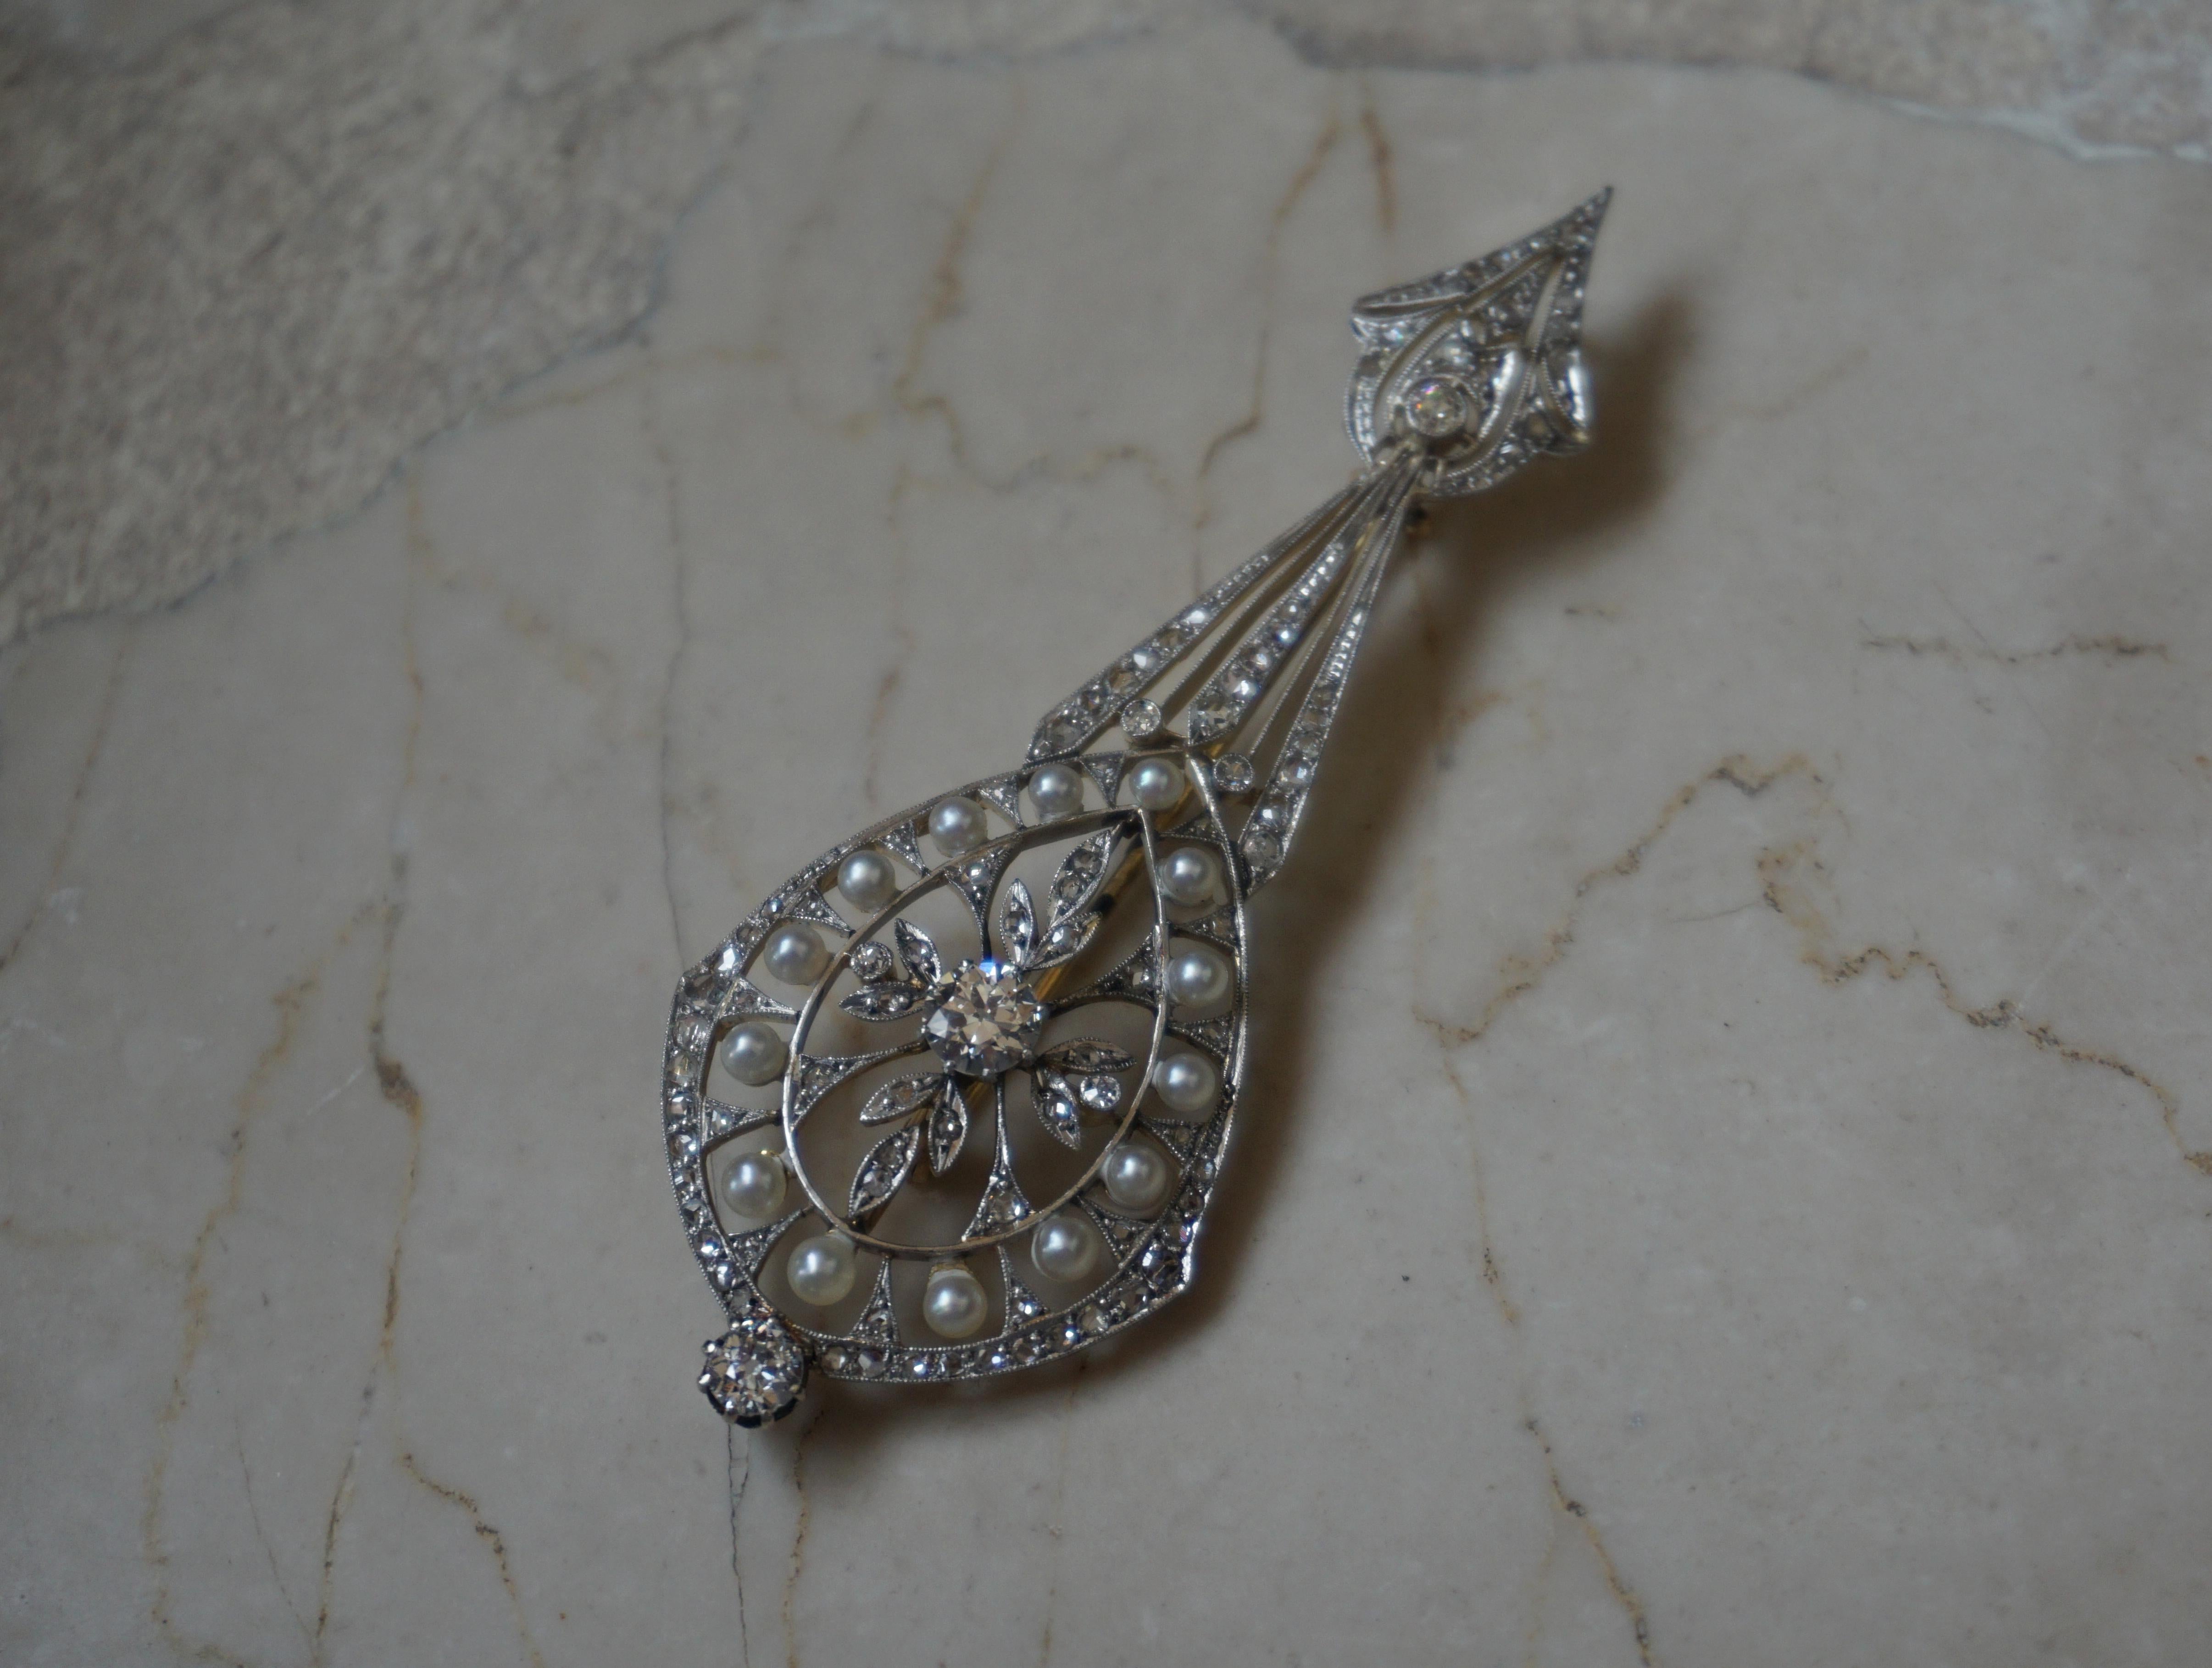 Antique Edwardian Circa 1900

Constructed of a combination of Platinum & 18 Karat Yellow Gold
(Platinum with an 18KT underbase layer)

Doubling as a Pin/Brooch or a Pendant

with a 17